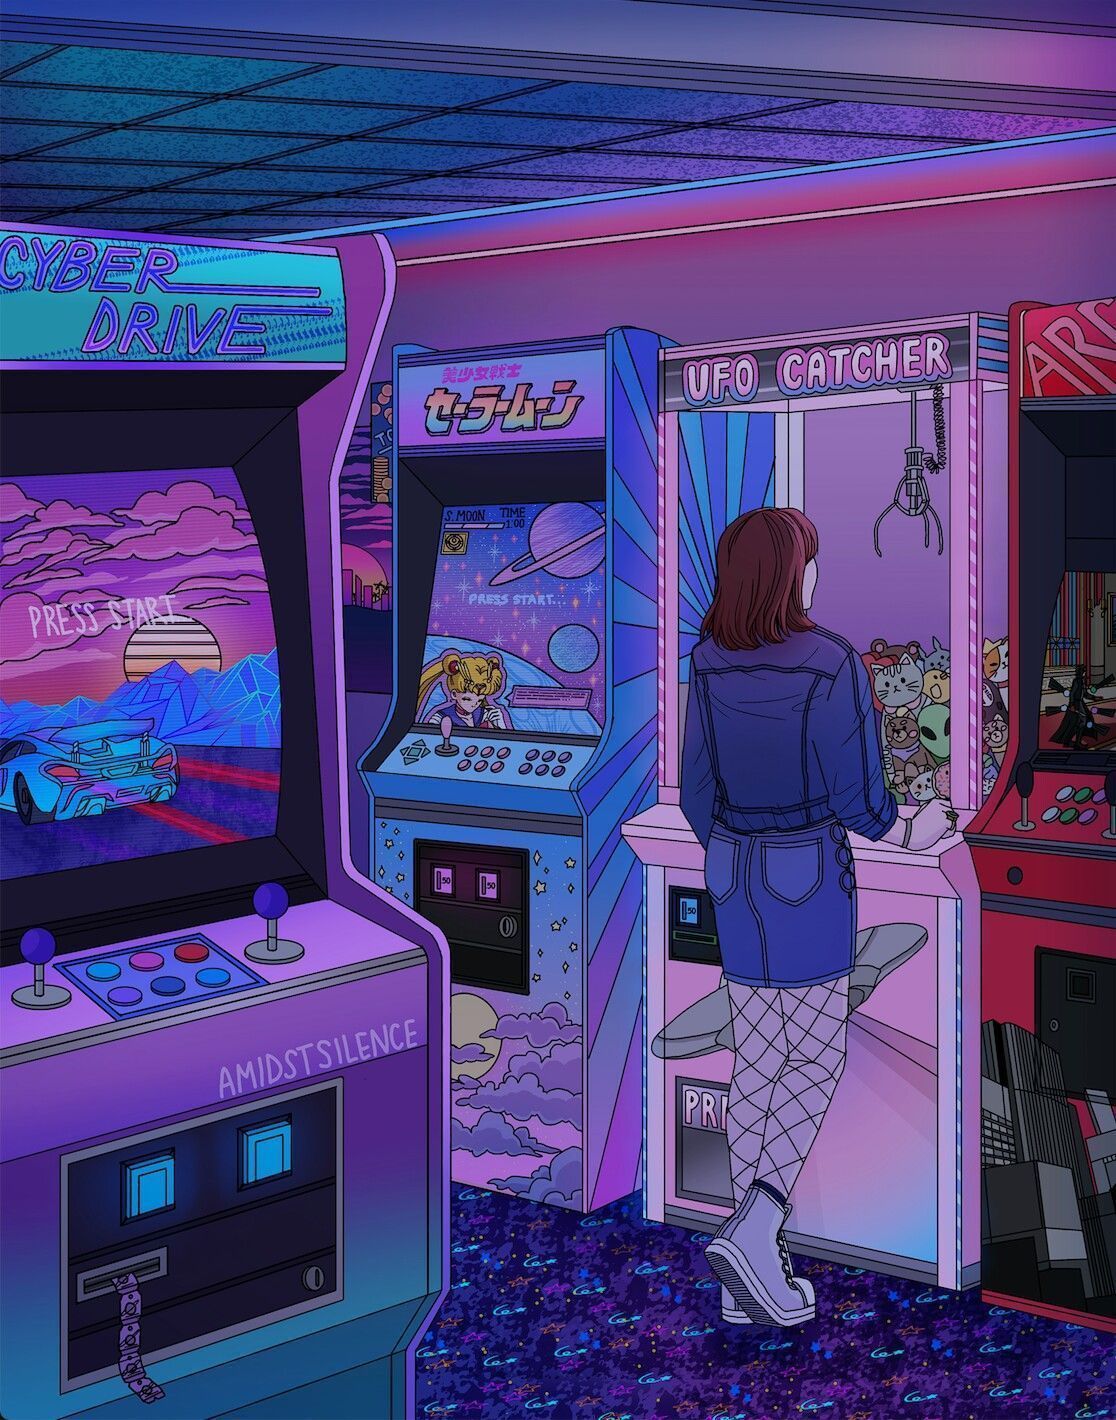 A woman standing in front of a row of arcade games - Arcade, 90s anime, gaming, technology